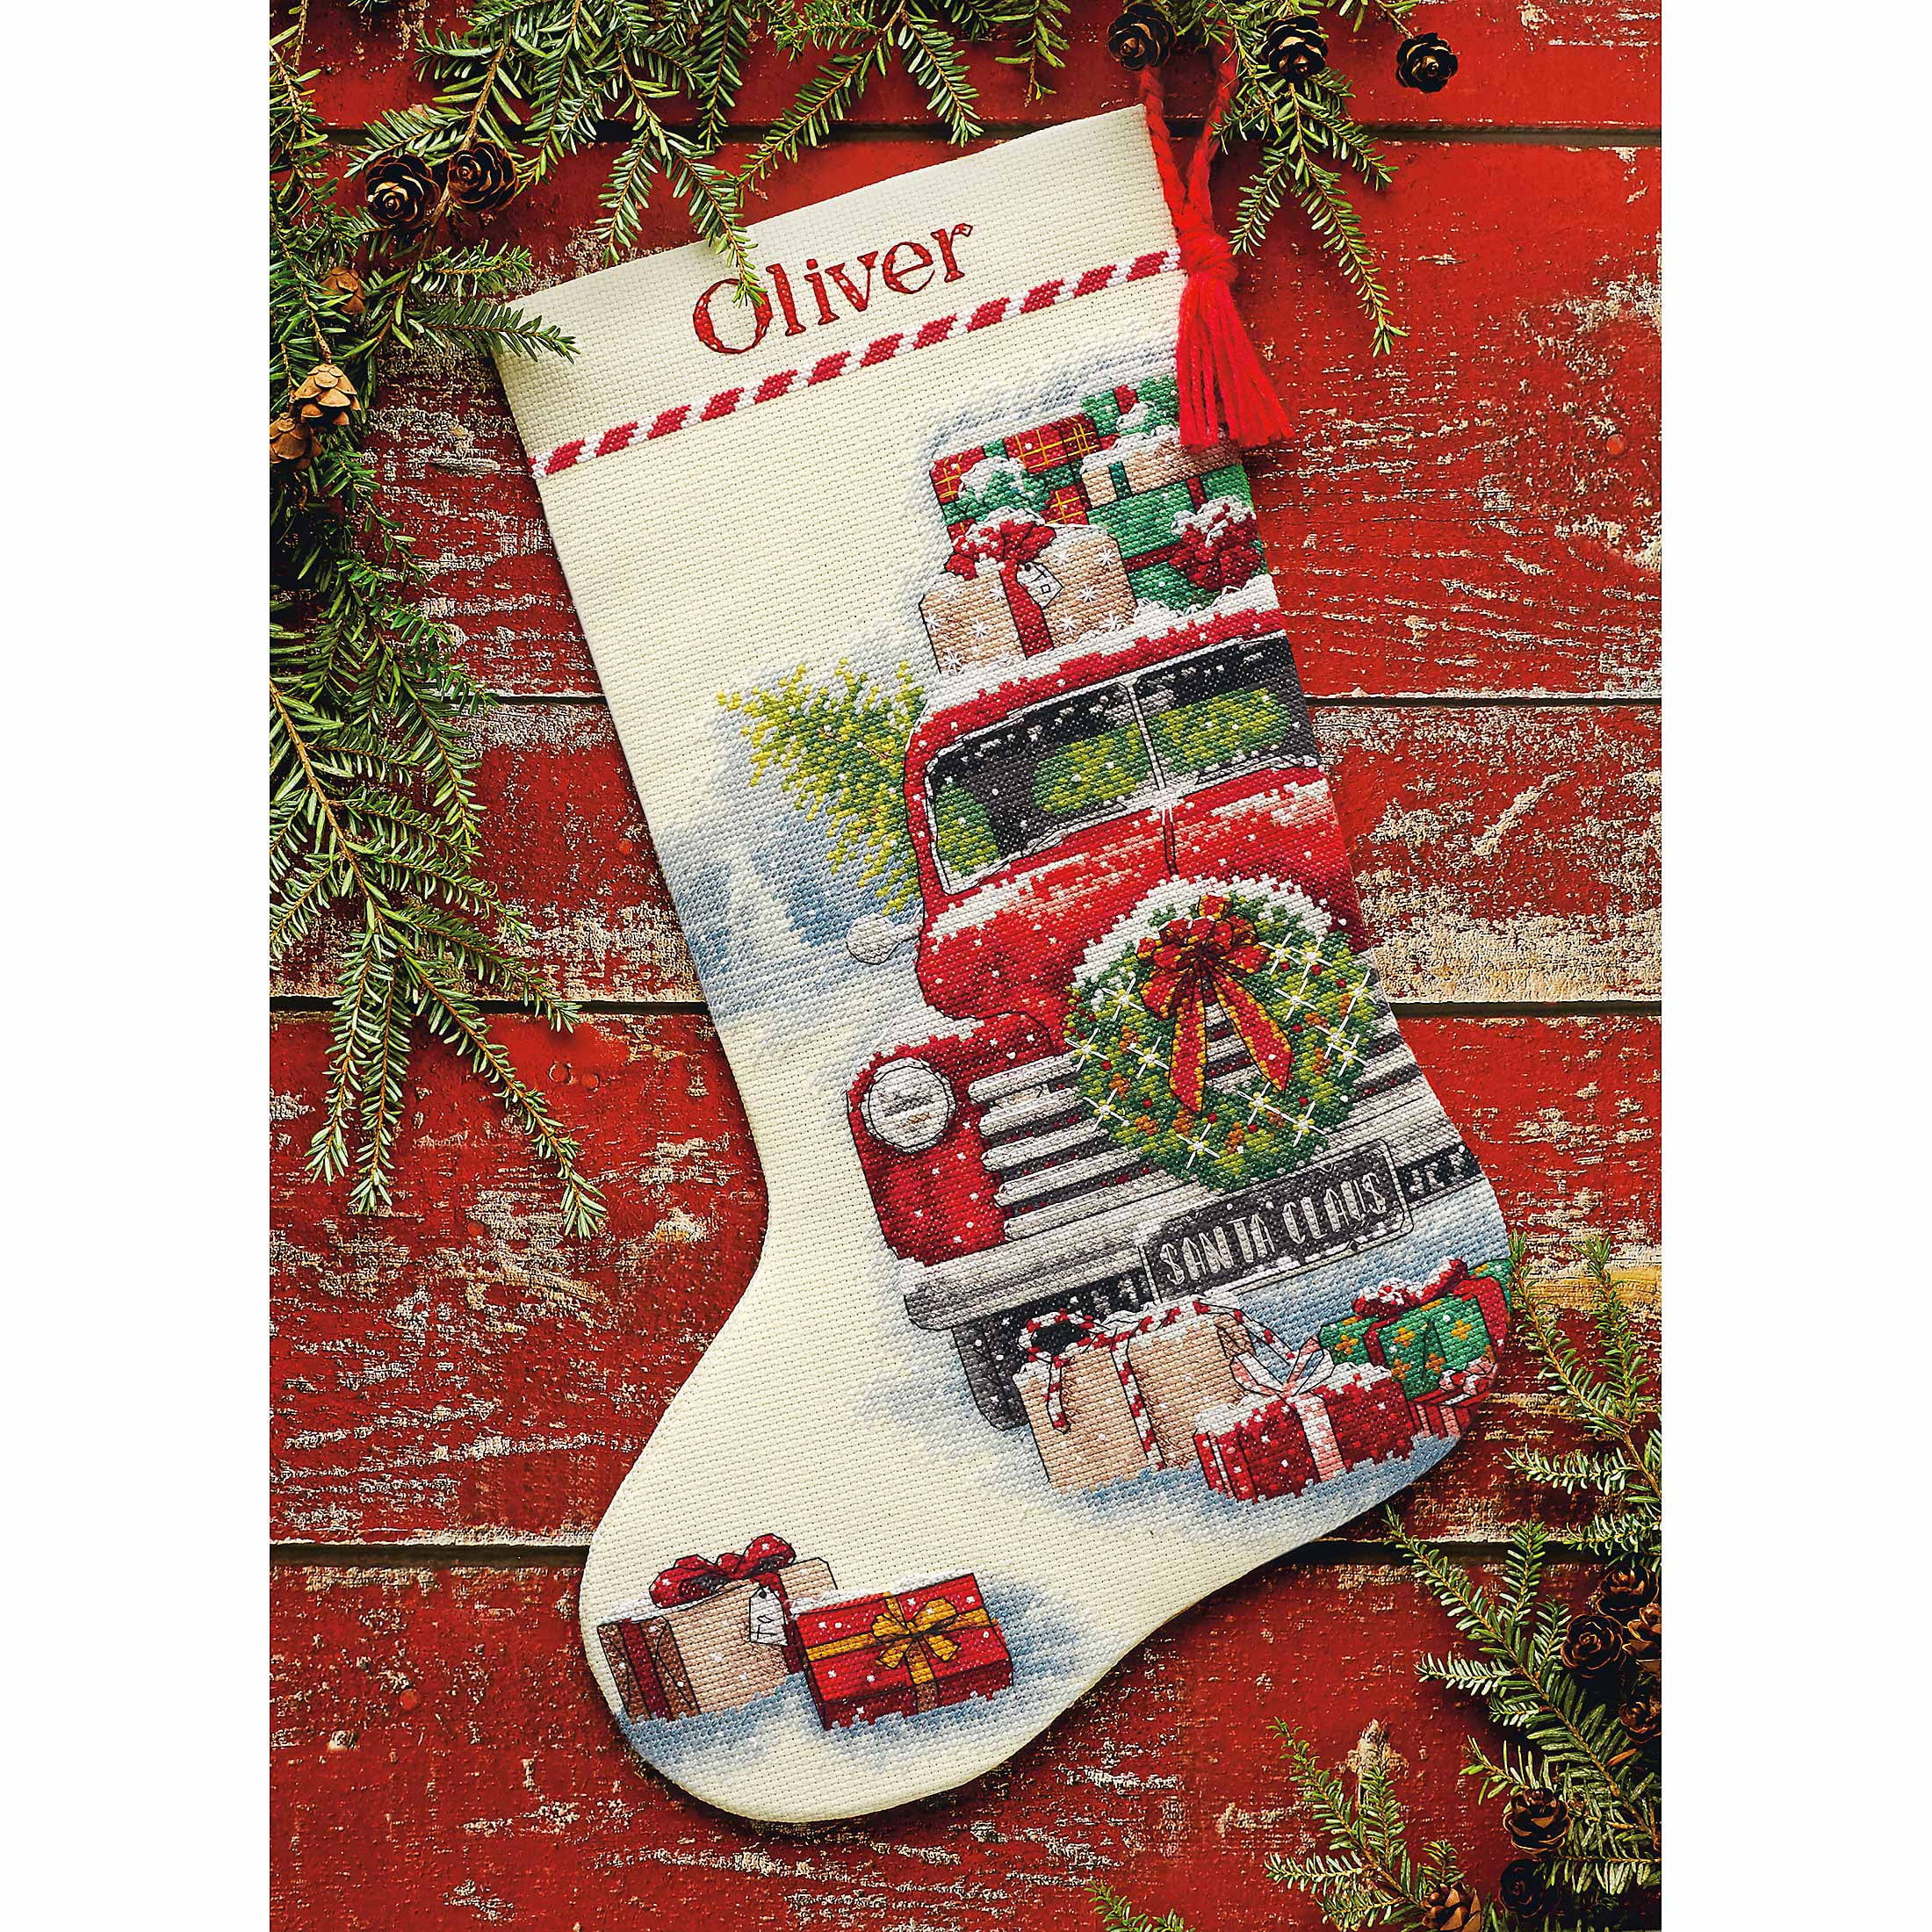 RARE SANTA CLAUS CROSS STITCH STOCKING KIT ALL TUCKERED OUT IN